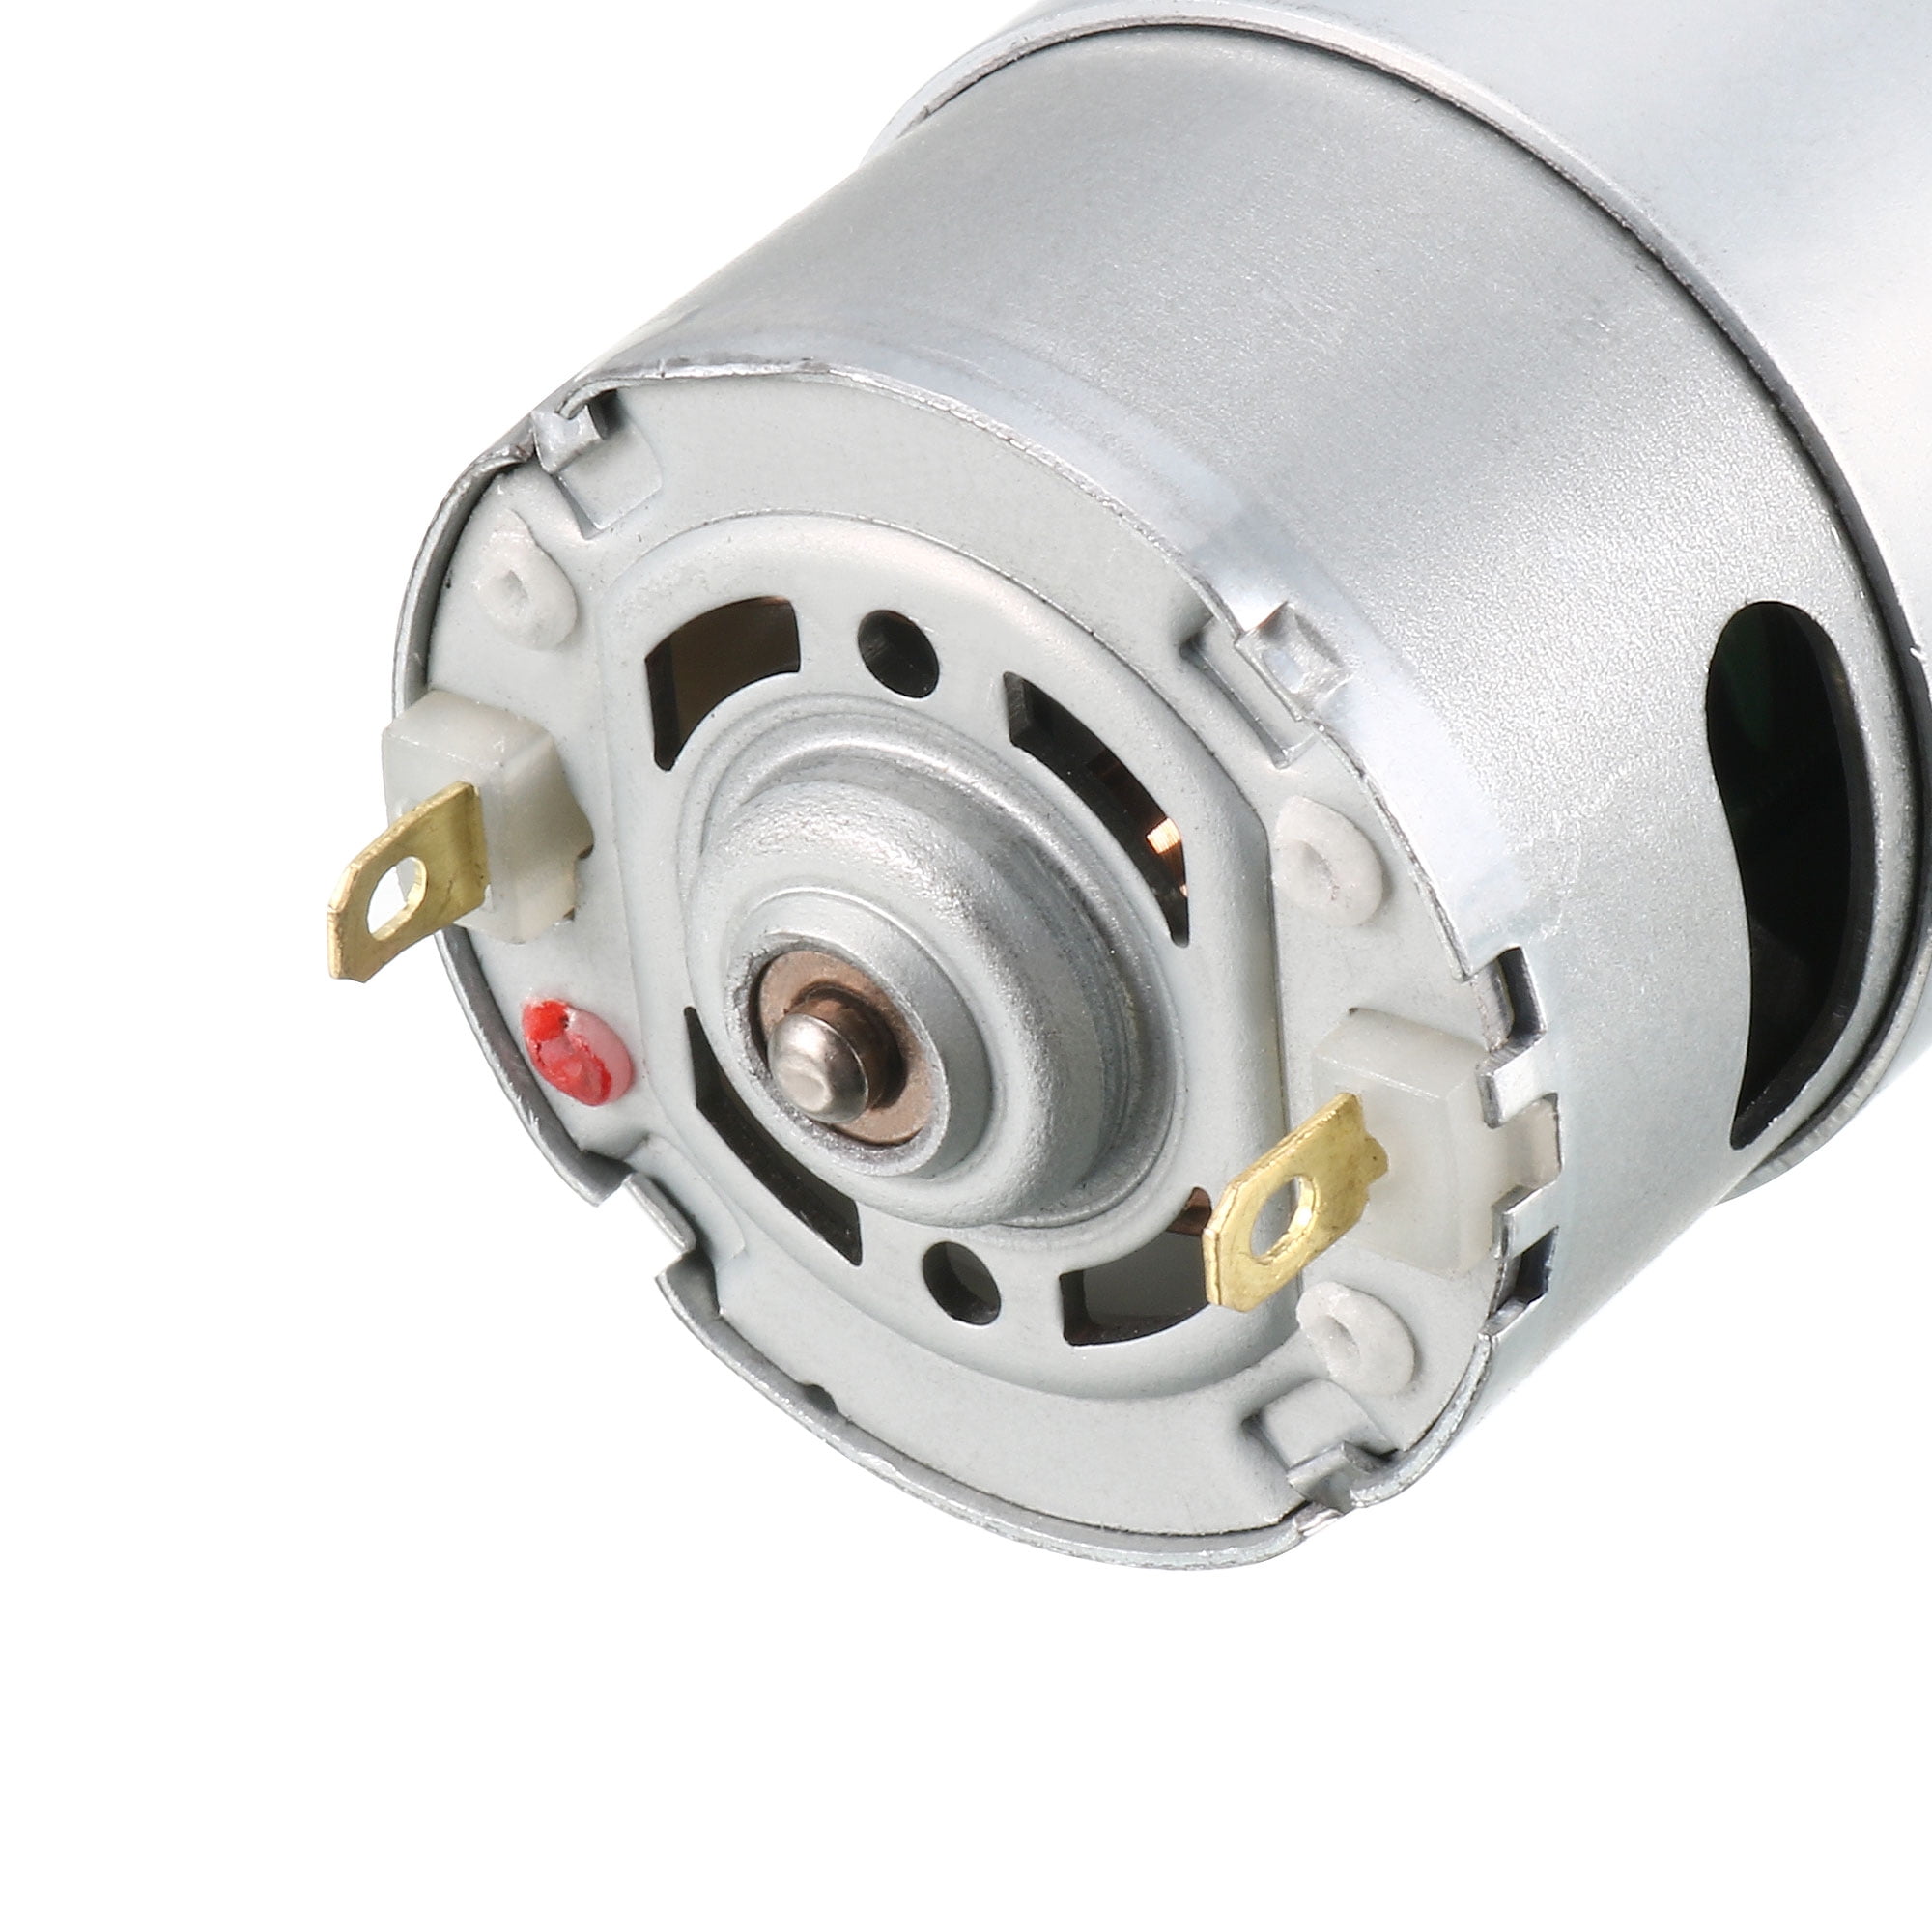 Brush Reducer Motor JGY371 Gear Motor April Gifts Reducer Motor DC DC12V 40RPM DC High Efficiency for Electronic Equipment 